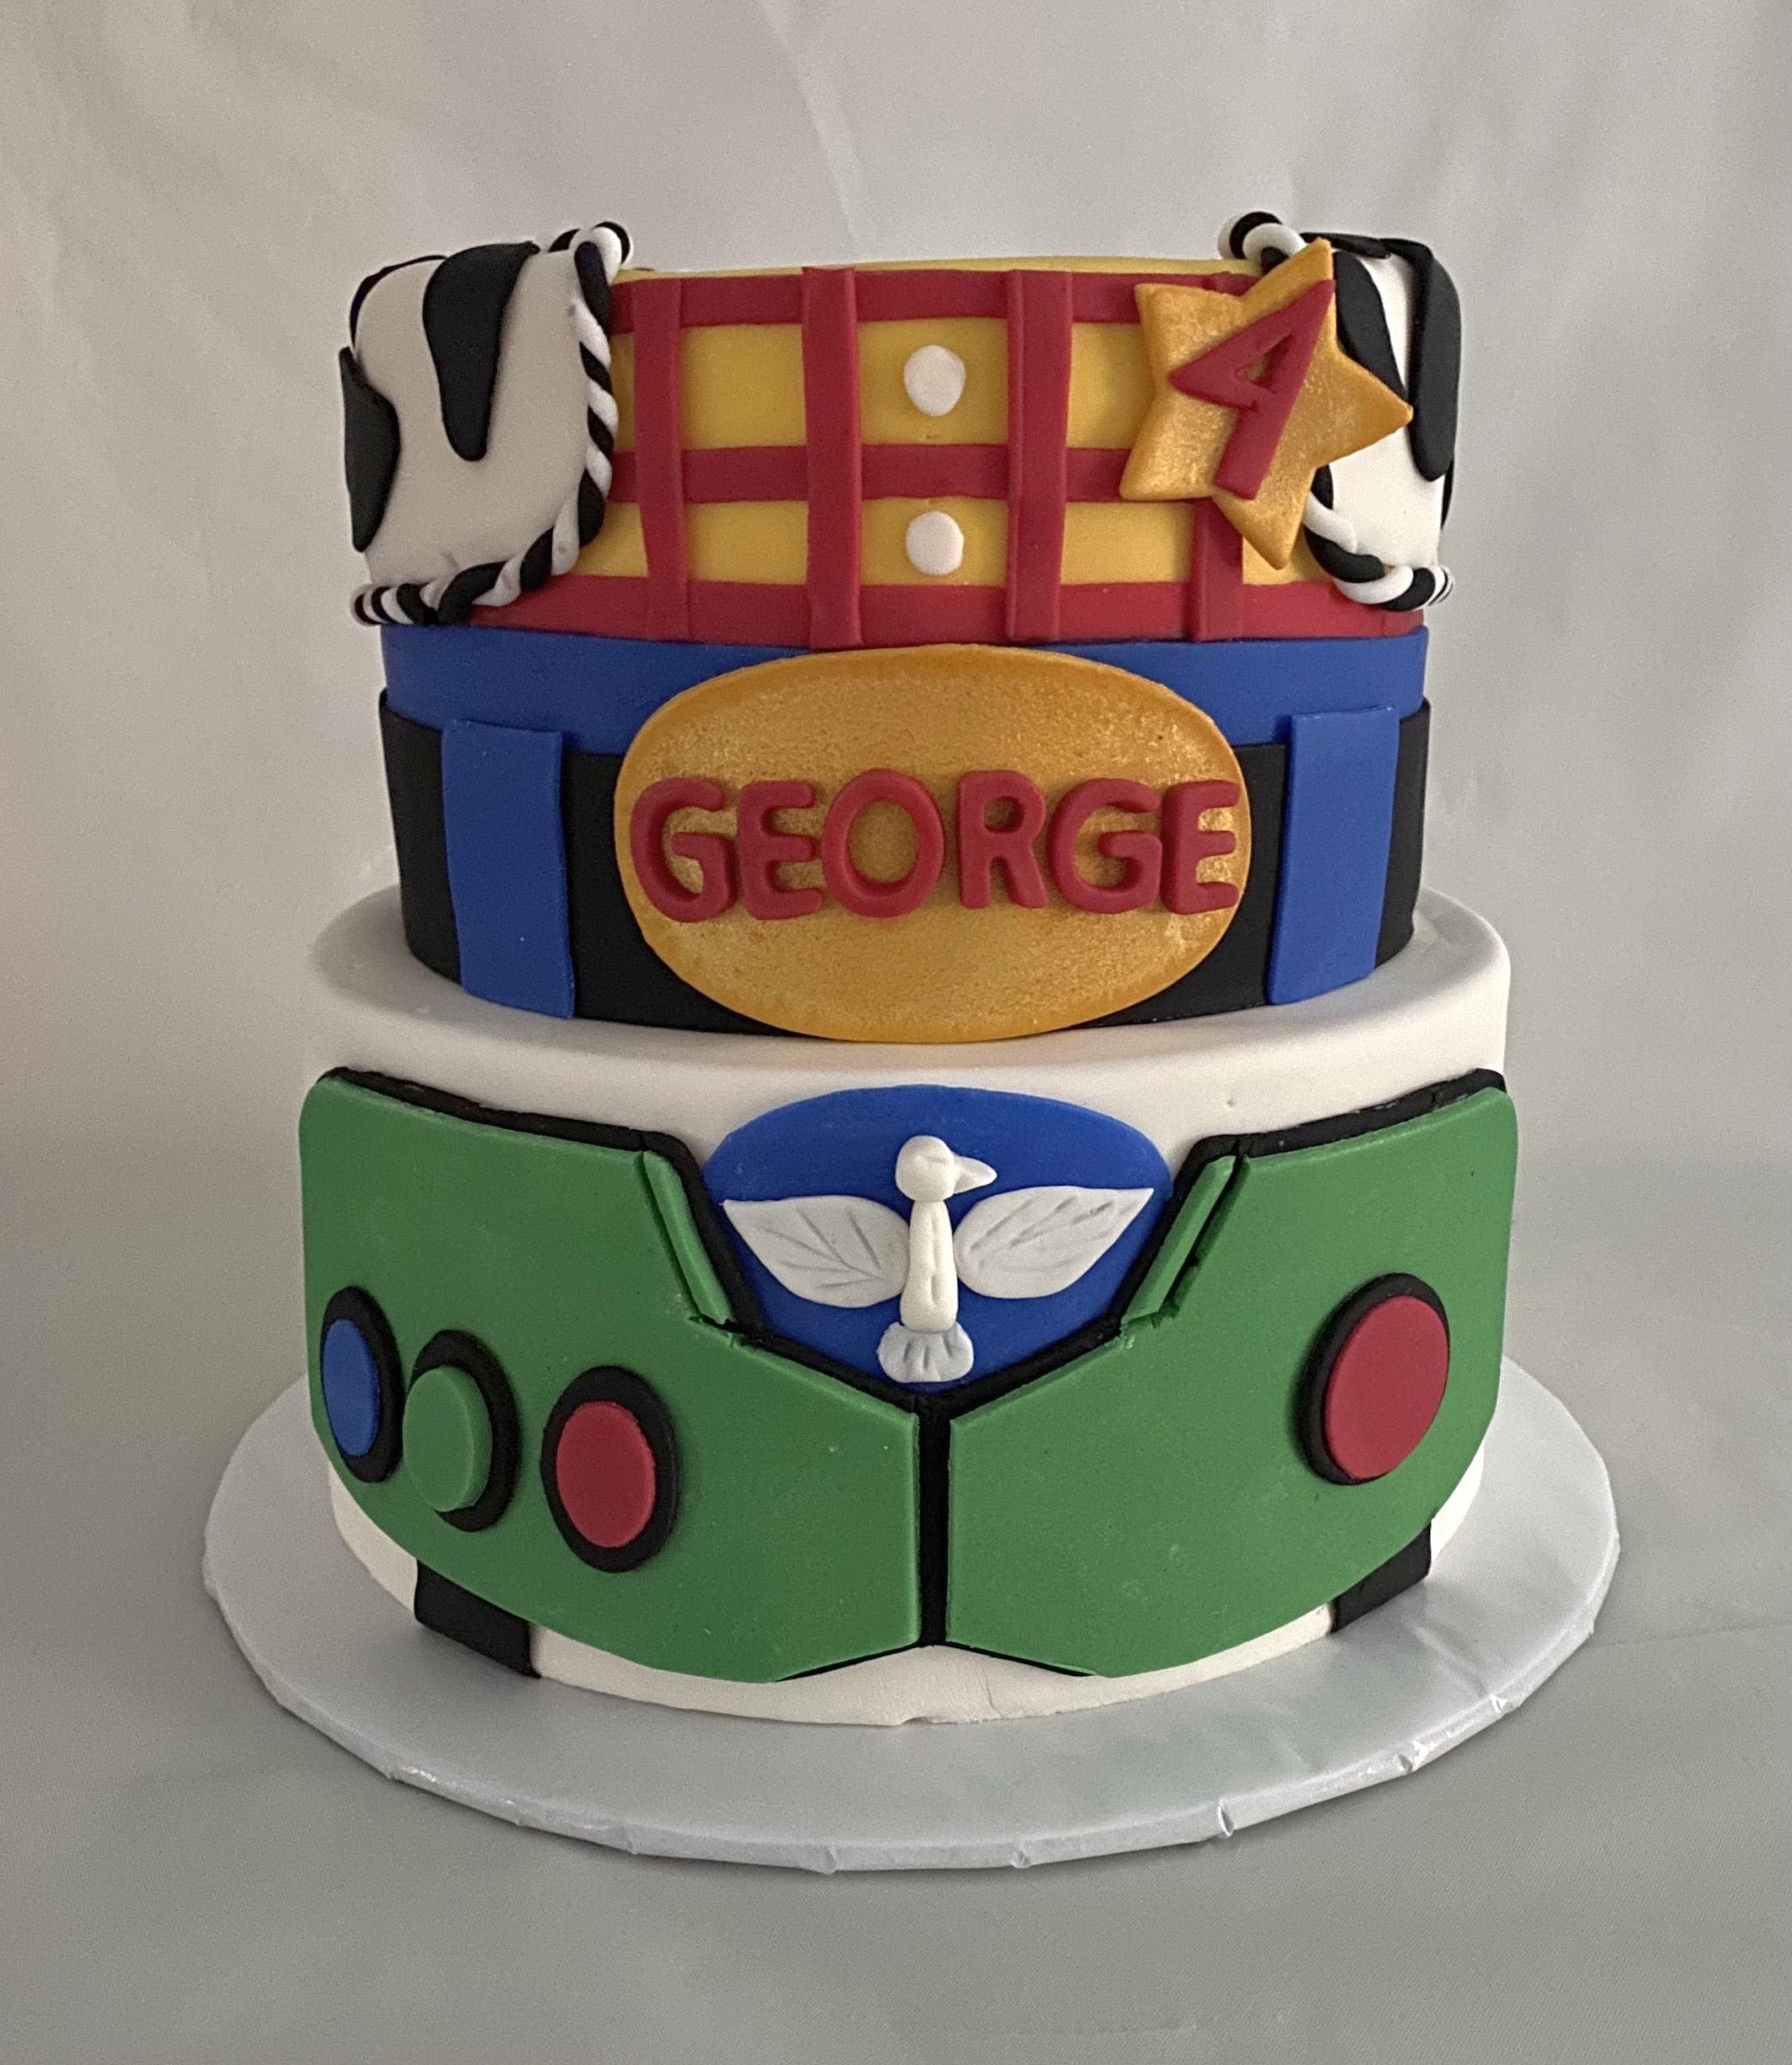 A fantastic movie themed birthday cake with hand-crafted fondant decorations from Village Patisserie in Toledo, Ohio